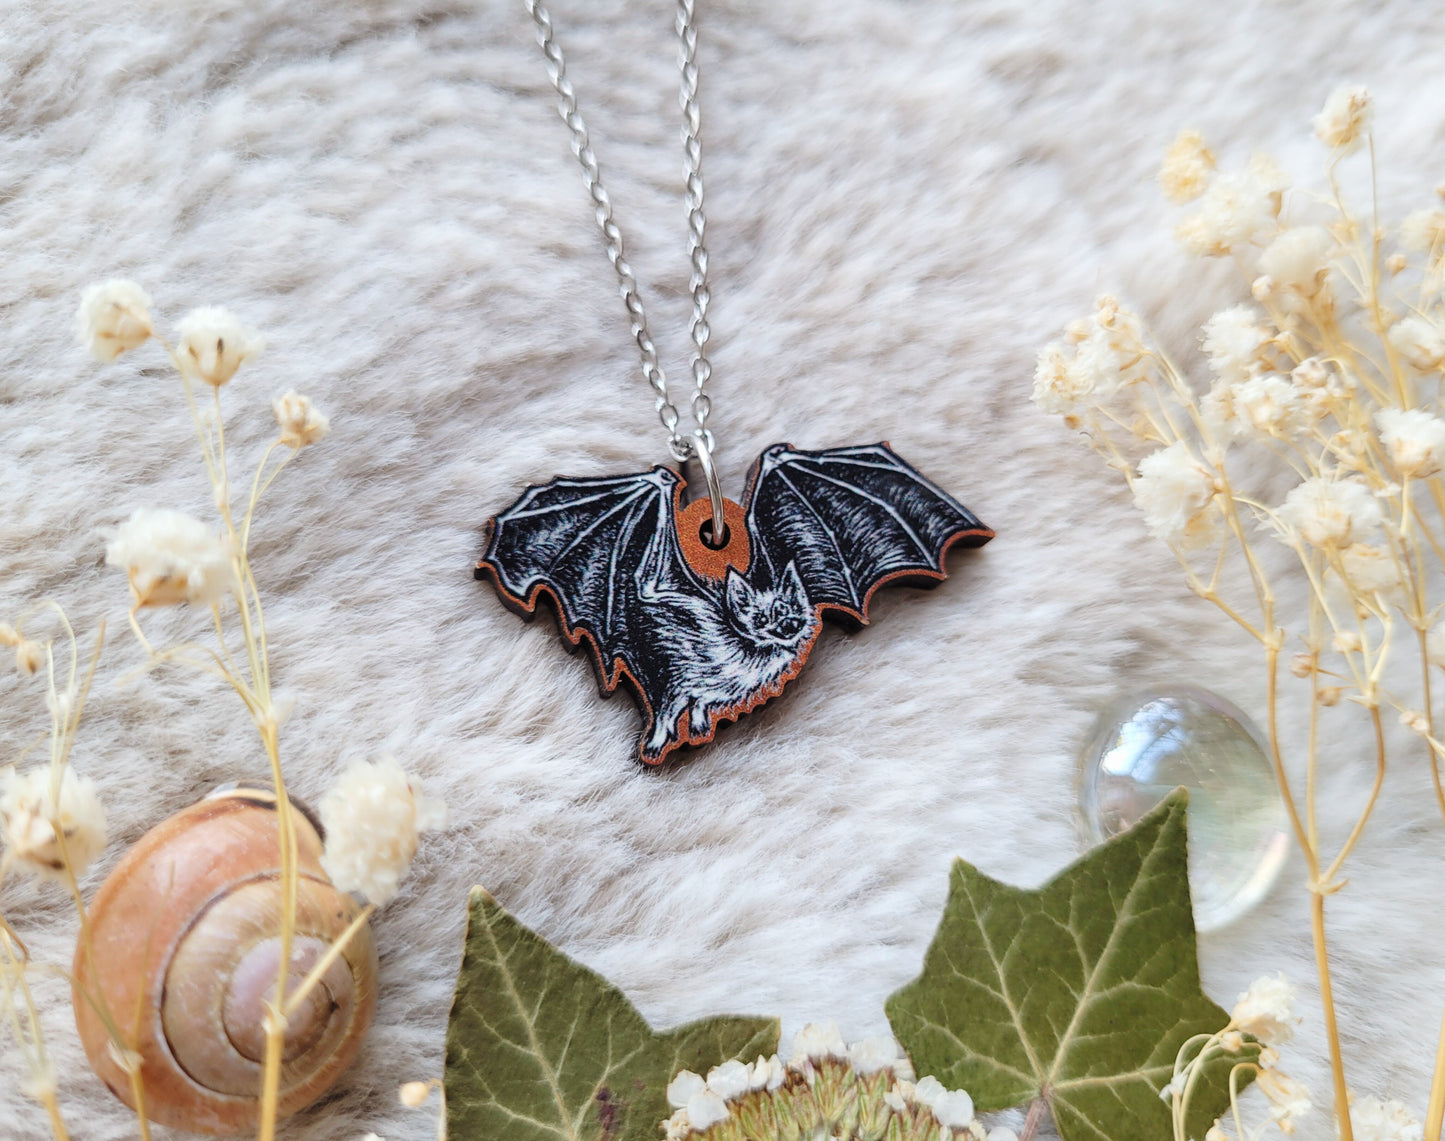 Bat illustrated necklace, responsibly sourced cherry wood, chain options available, by Grace Moth